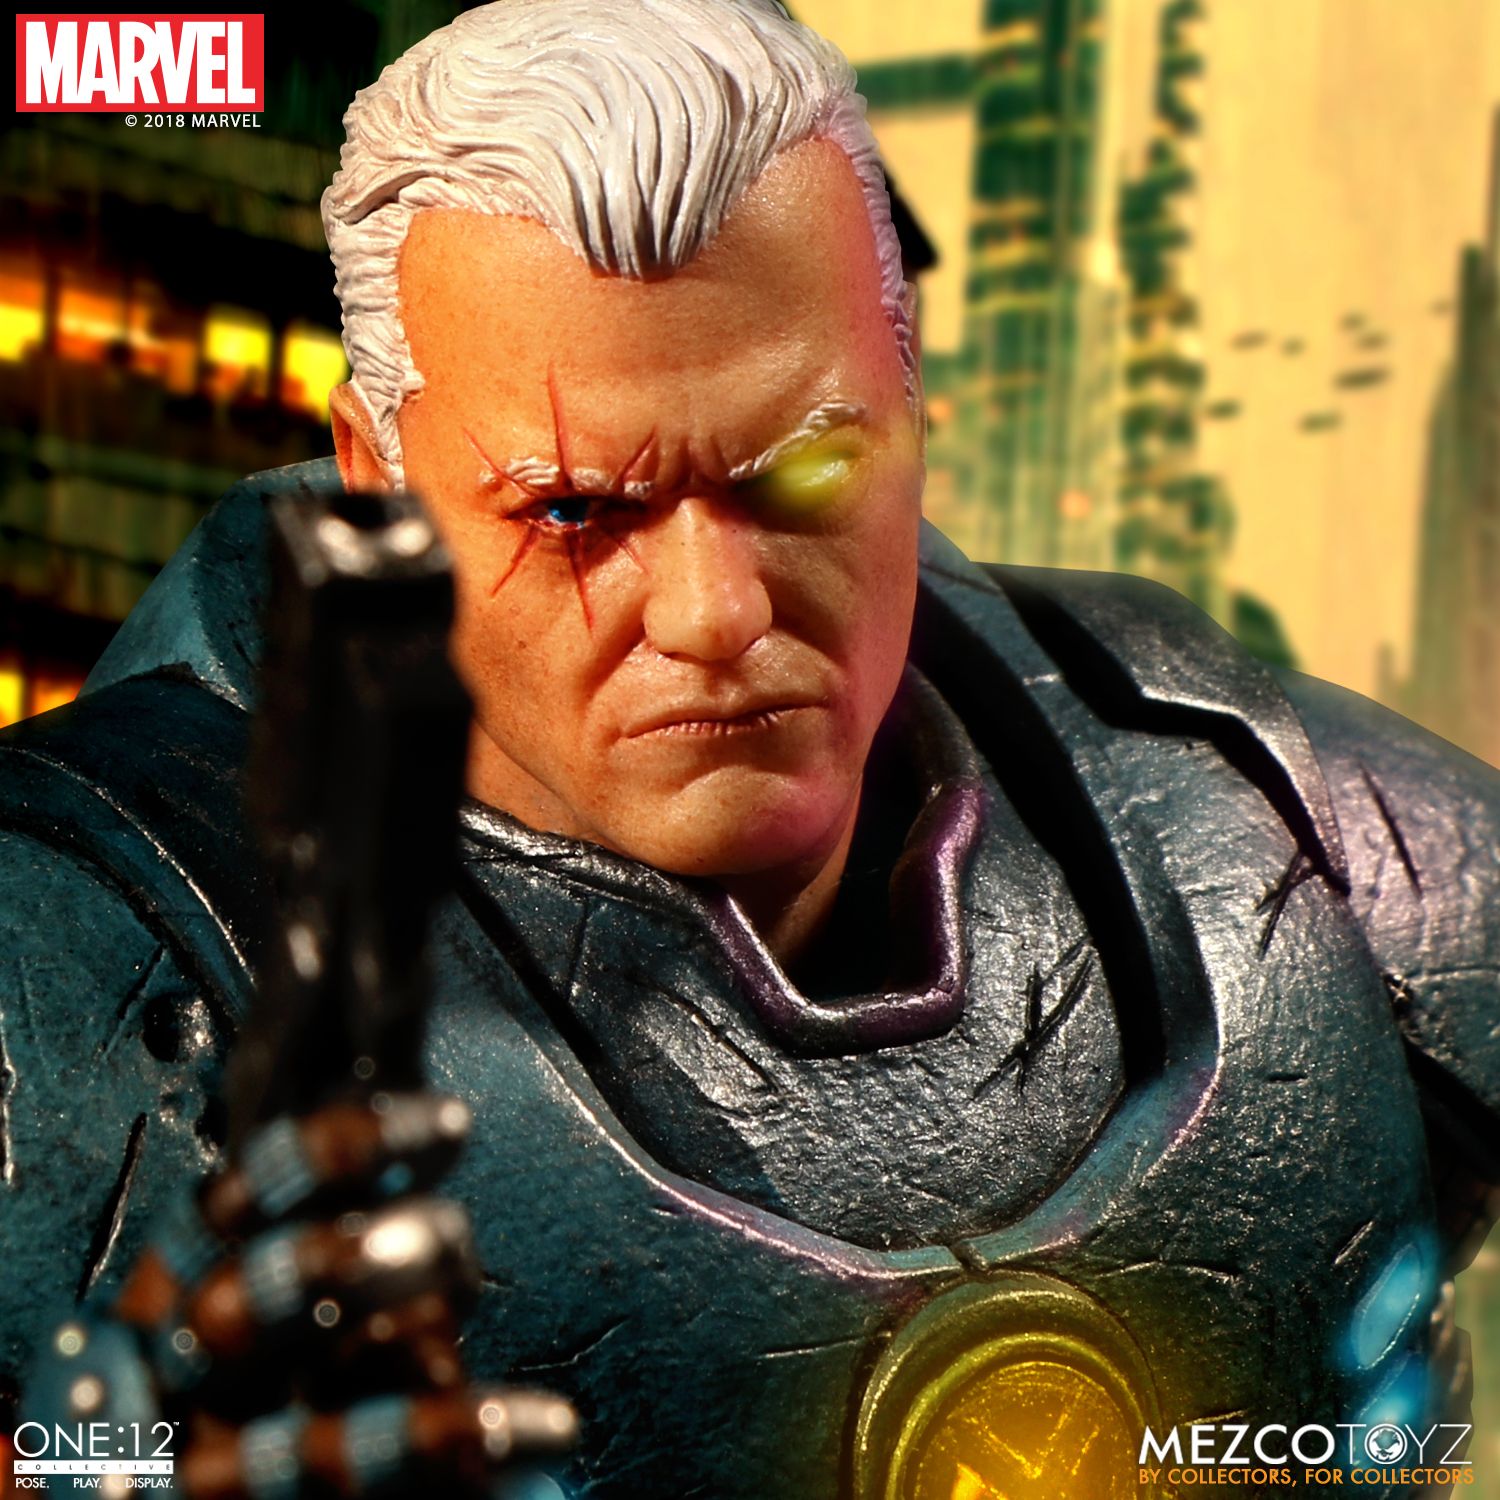 Mezco One:12 Marvel's Cable Action Figure 